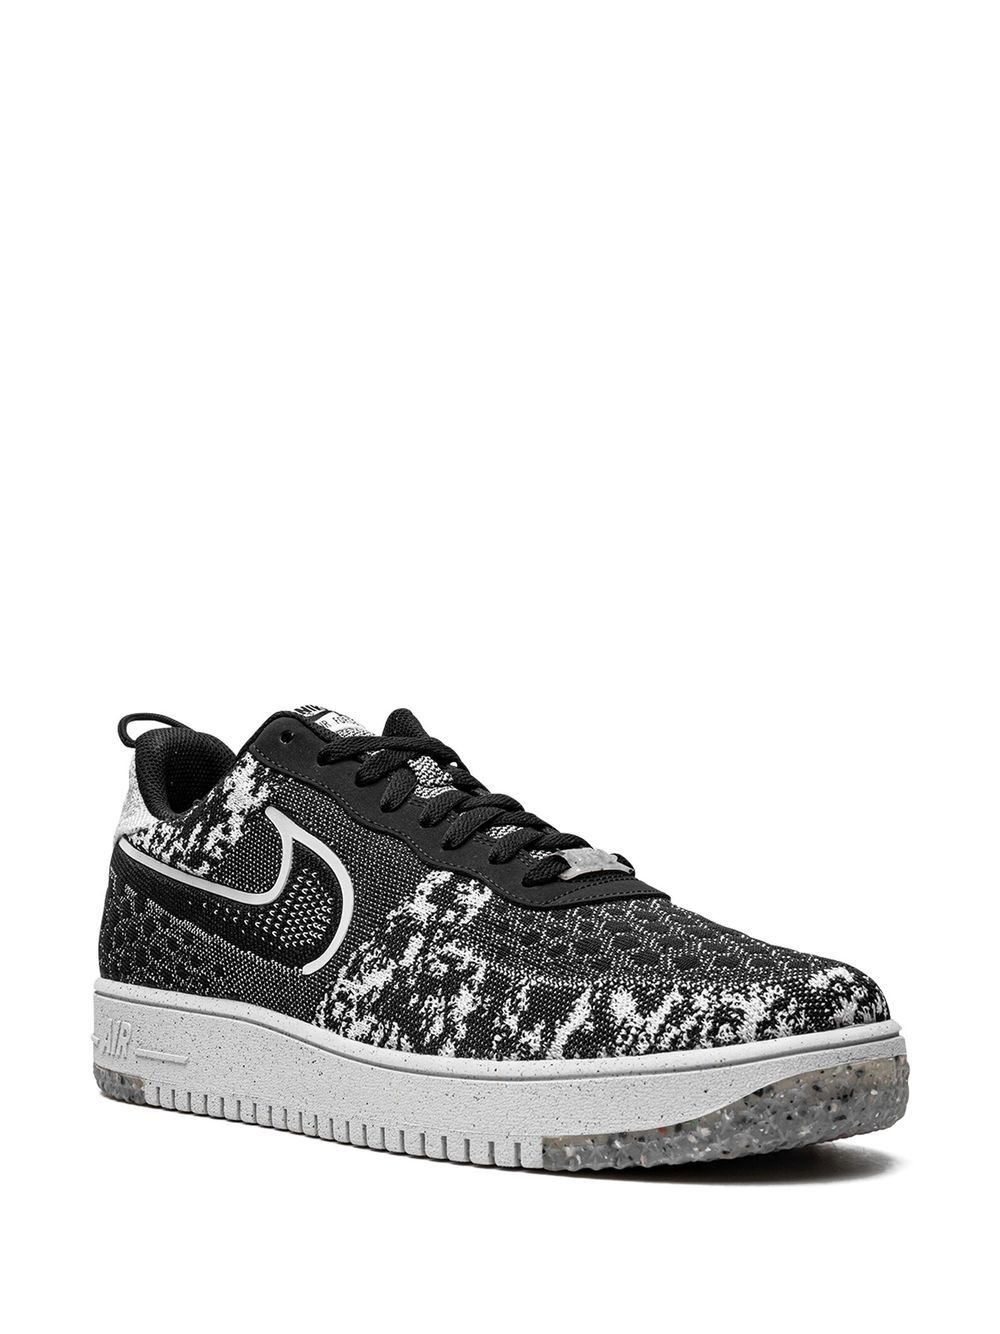 Air Force 1 Crater Flyknit "Black/White" sneakers - 2